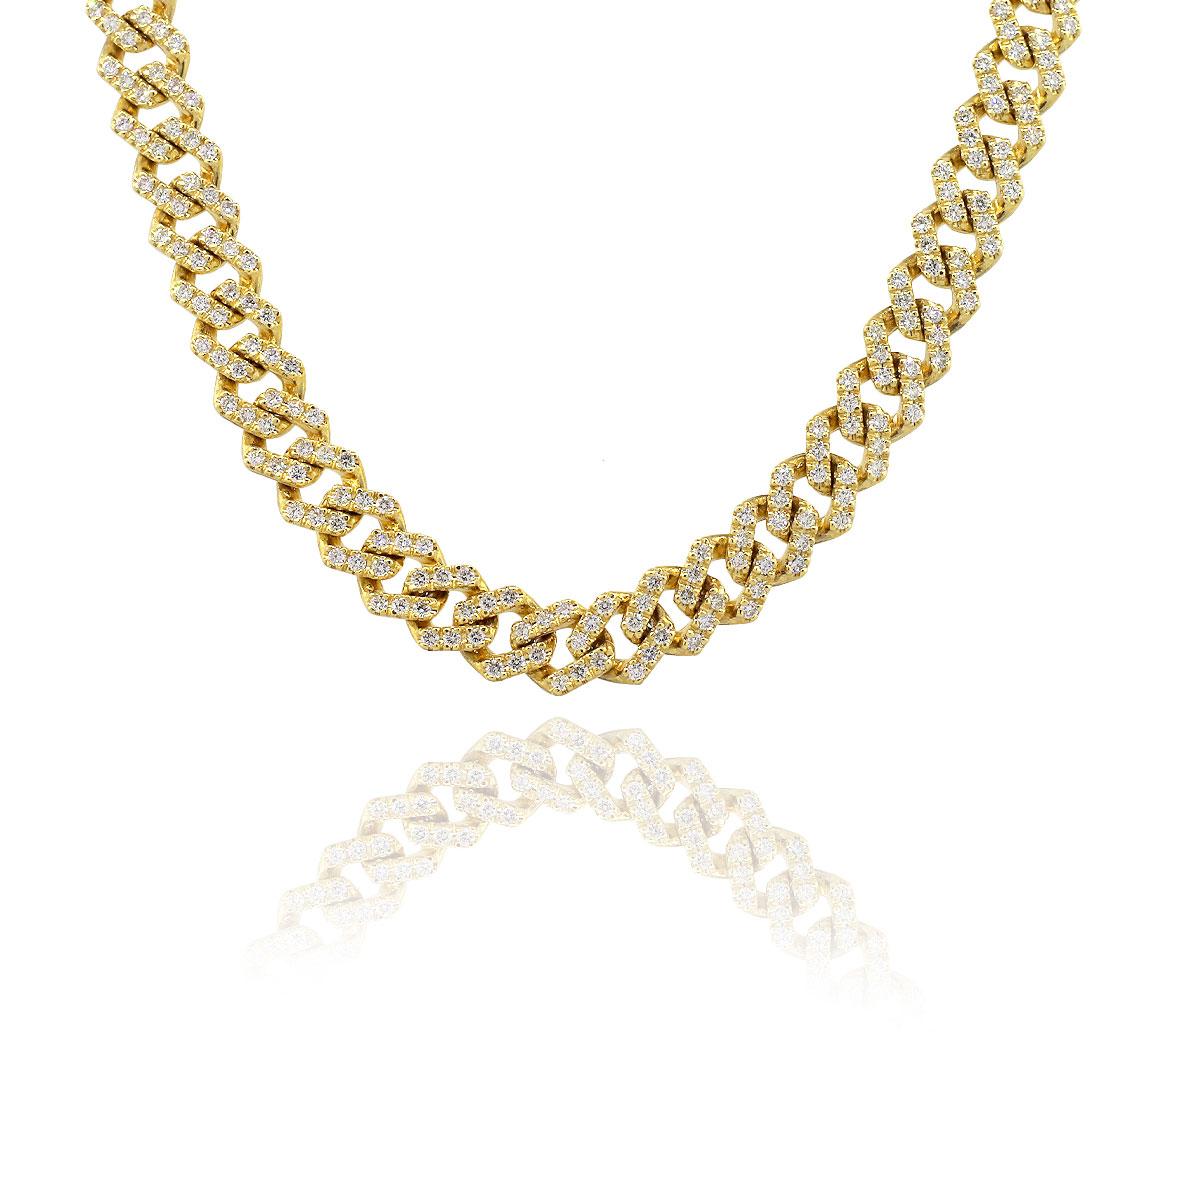 Material: 14k Yellow Gold
Diamond Details: Approx. 14.83ctw of round cut diamonds. Diamonds are G/H in color and VS in clarity
Measurements: Necklace measures 22″ in length.
Fastening: Tongue in box clasp with safety latch
Item Weight: 82.8g